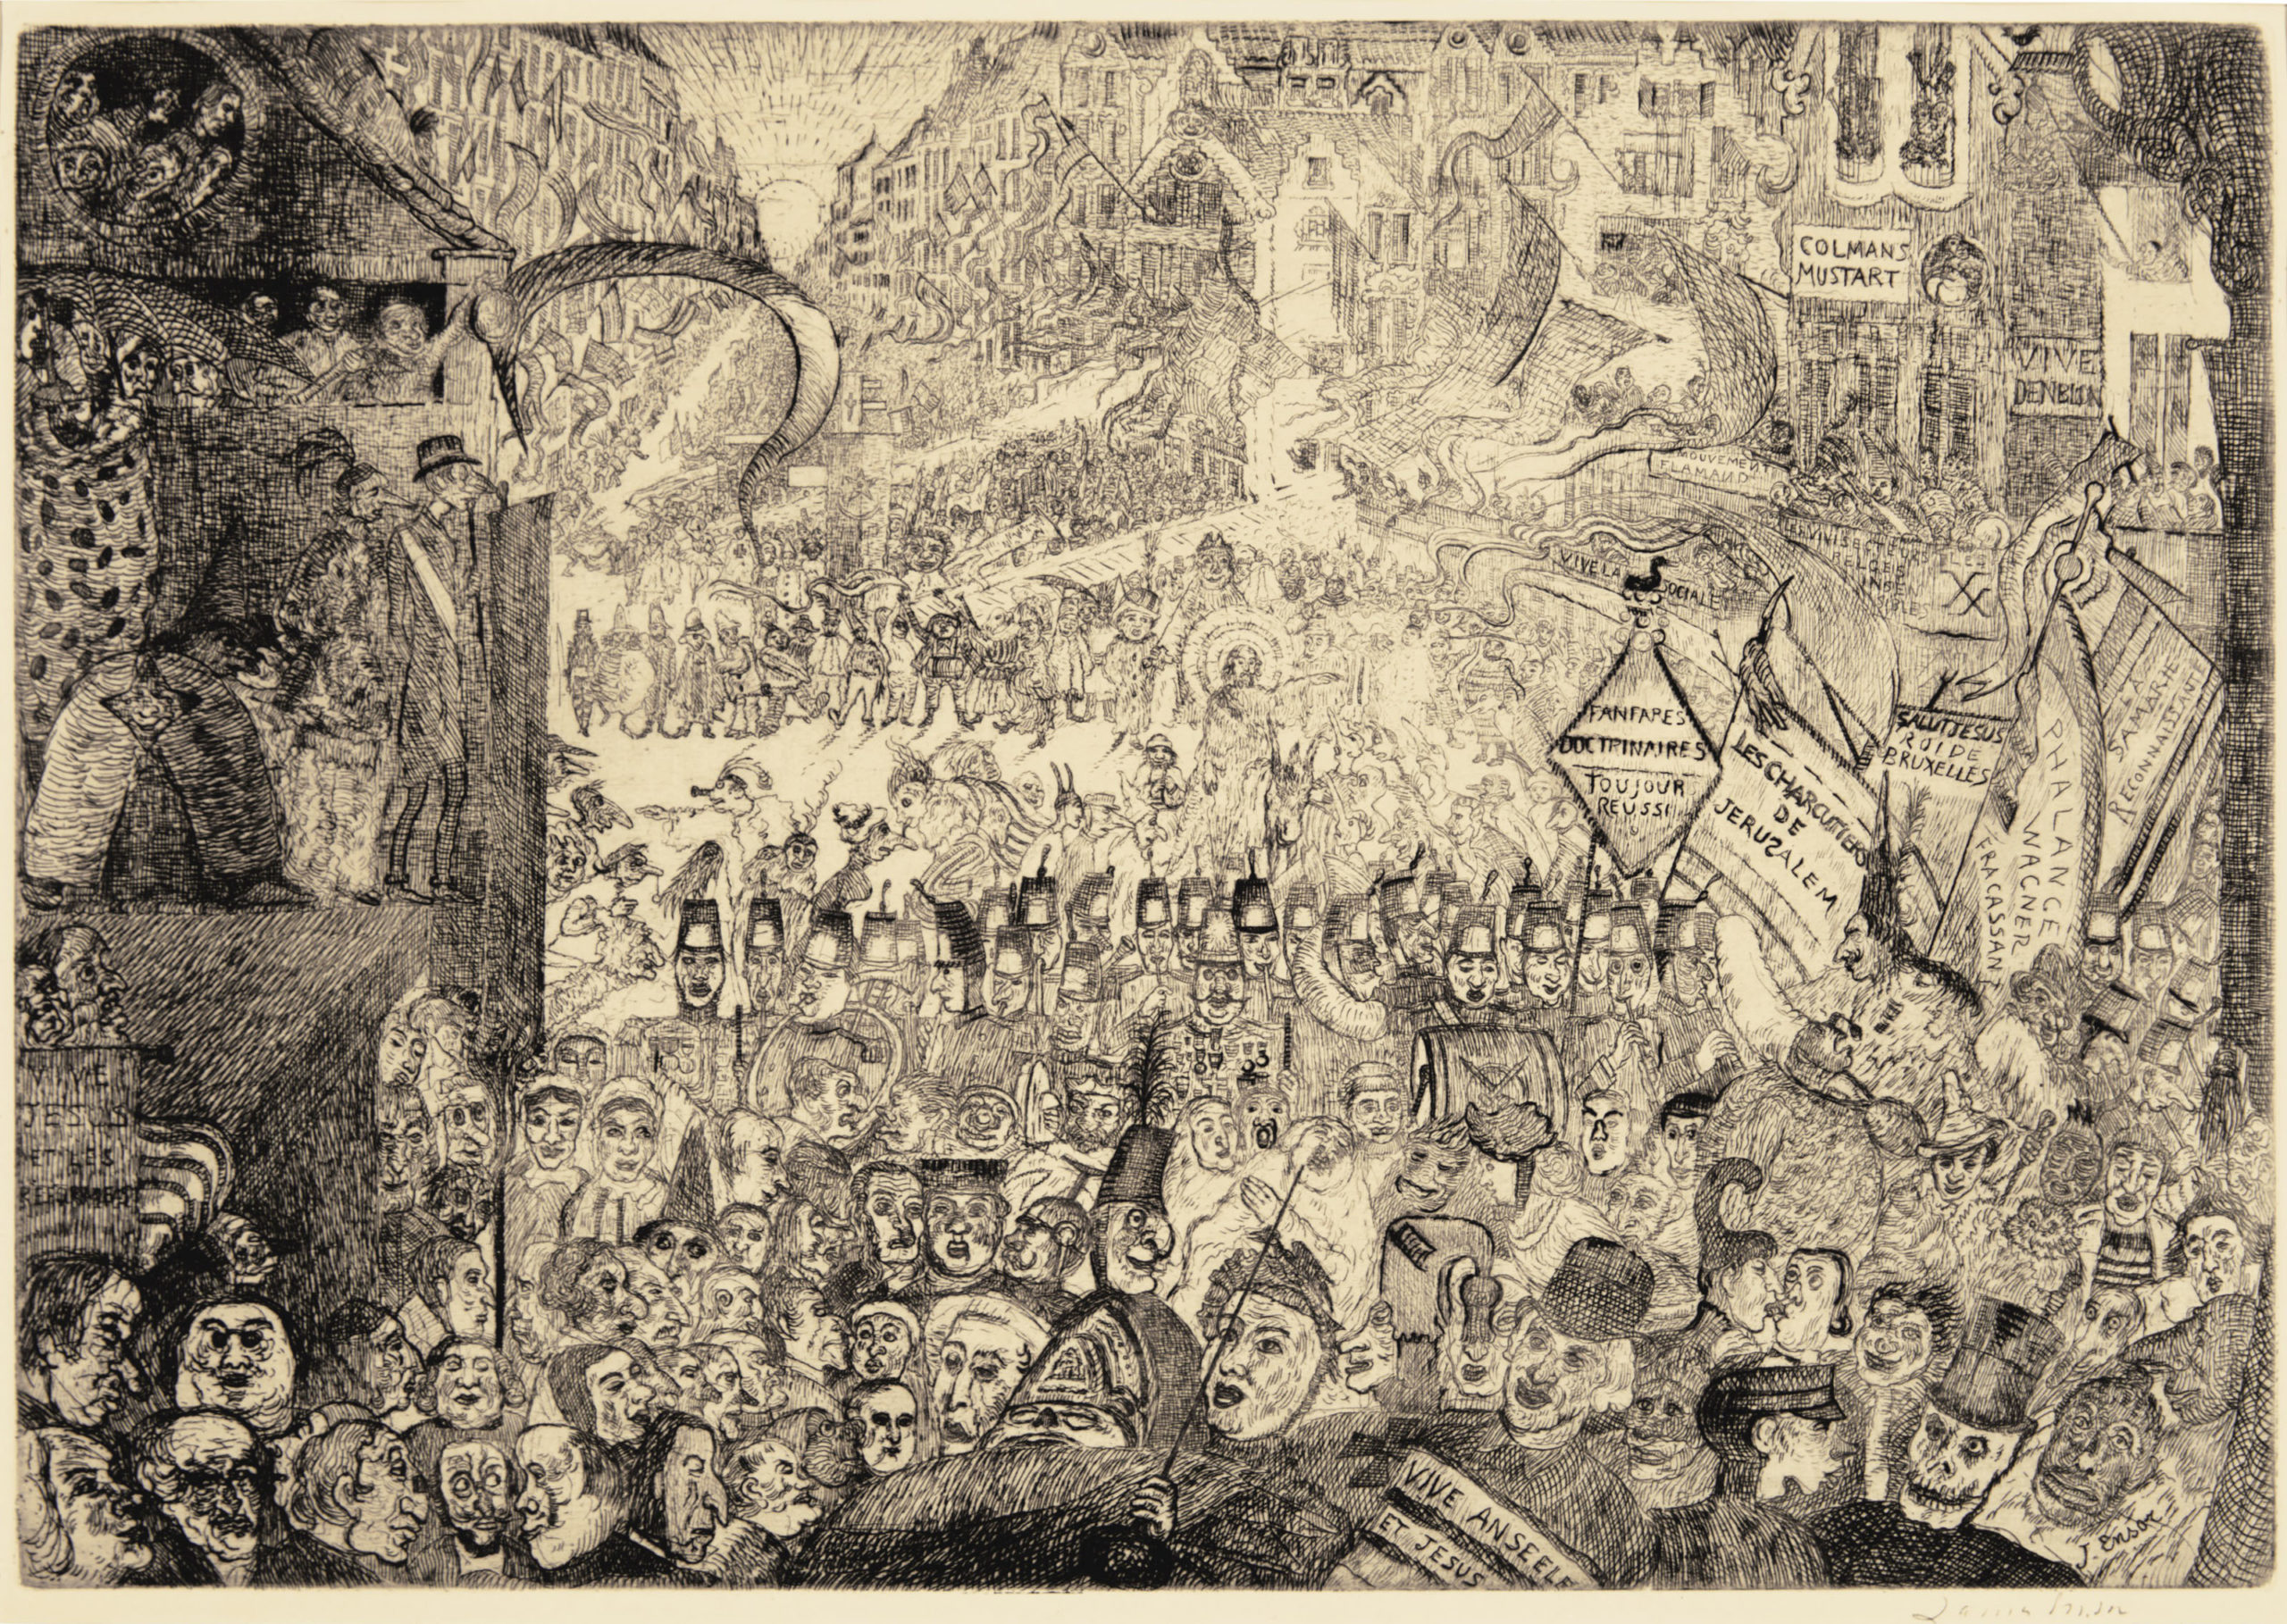 James Ensor, Christ’s Entry into Brussels in 1889, 1898, etching, 30.3 × 45.8 cm